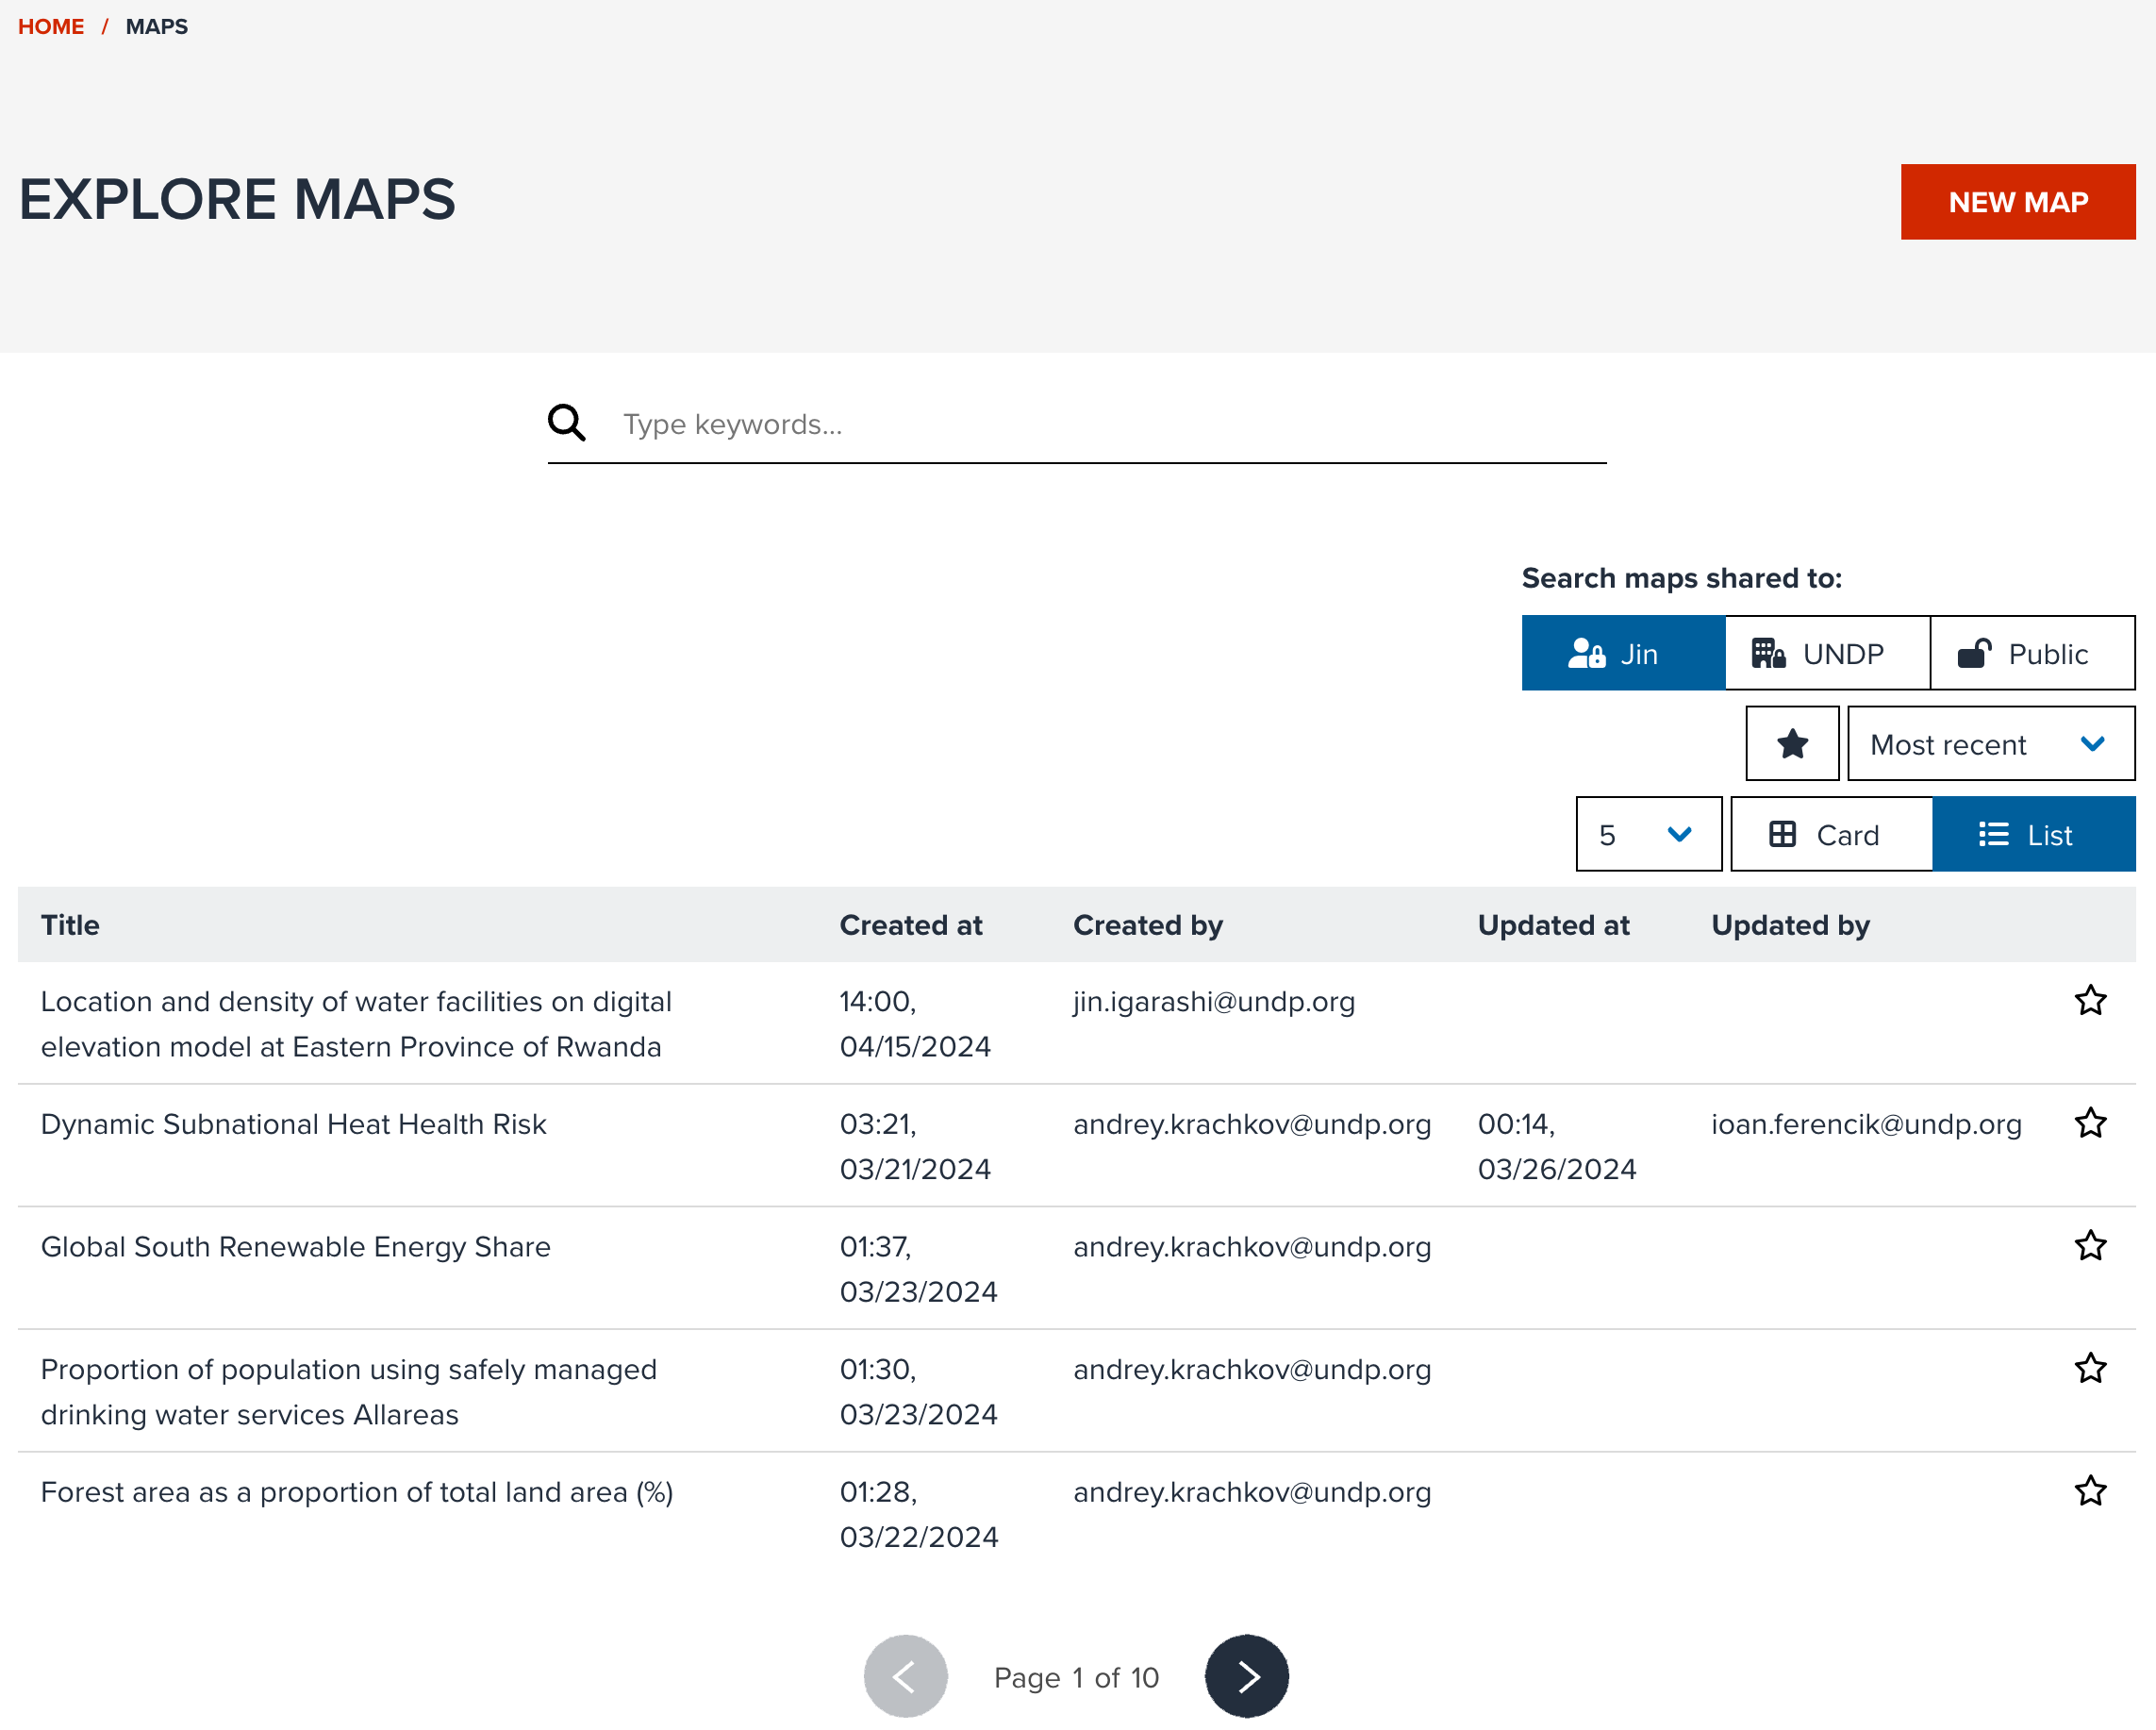 Explore maps in List view